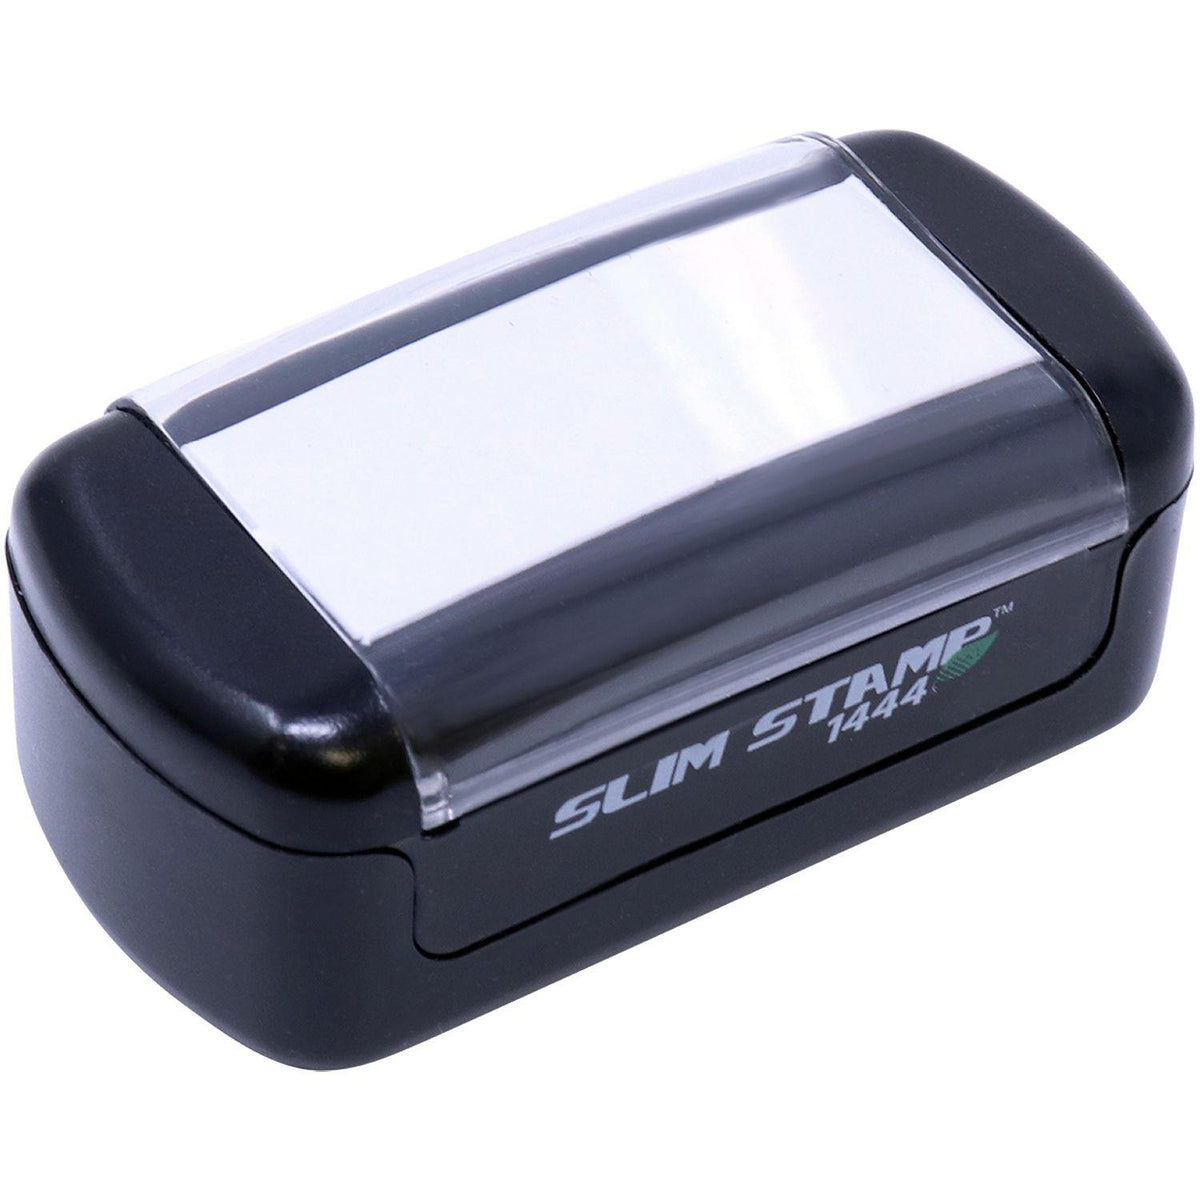 Slim Pre-Inked Box Closed No Order Stamp - Engineer Seal Stamps - Brand_Slim, Impression Size_Small, Stamp Type_Pre-Inked Stamp, Type of Use_Office, Type of Use_Postal &amp; Mailing